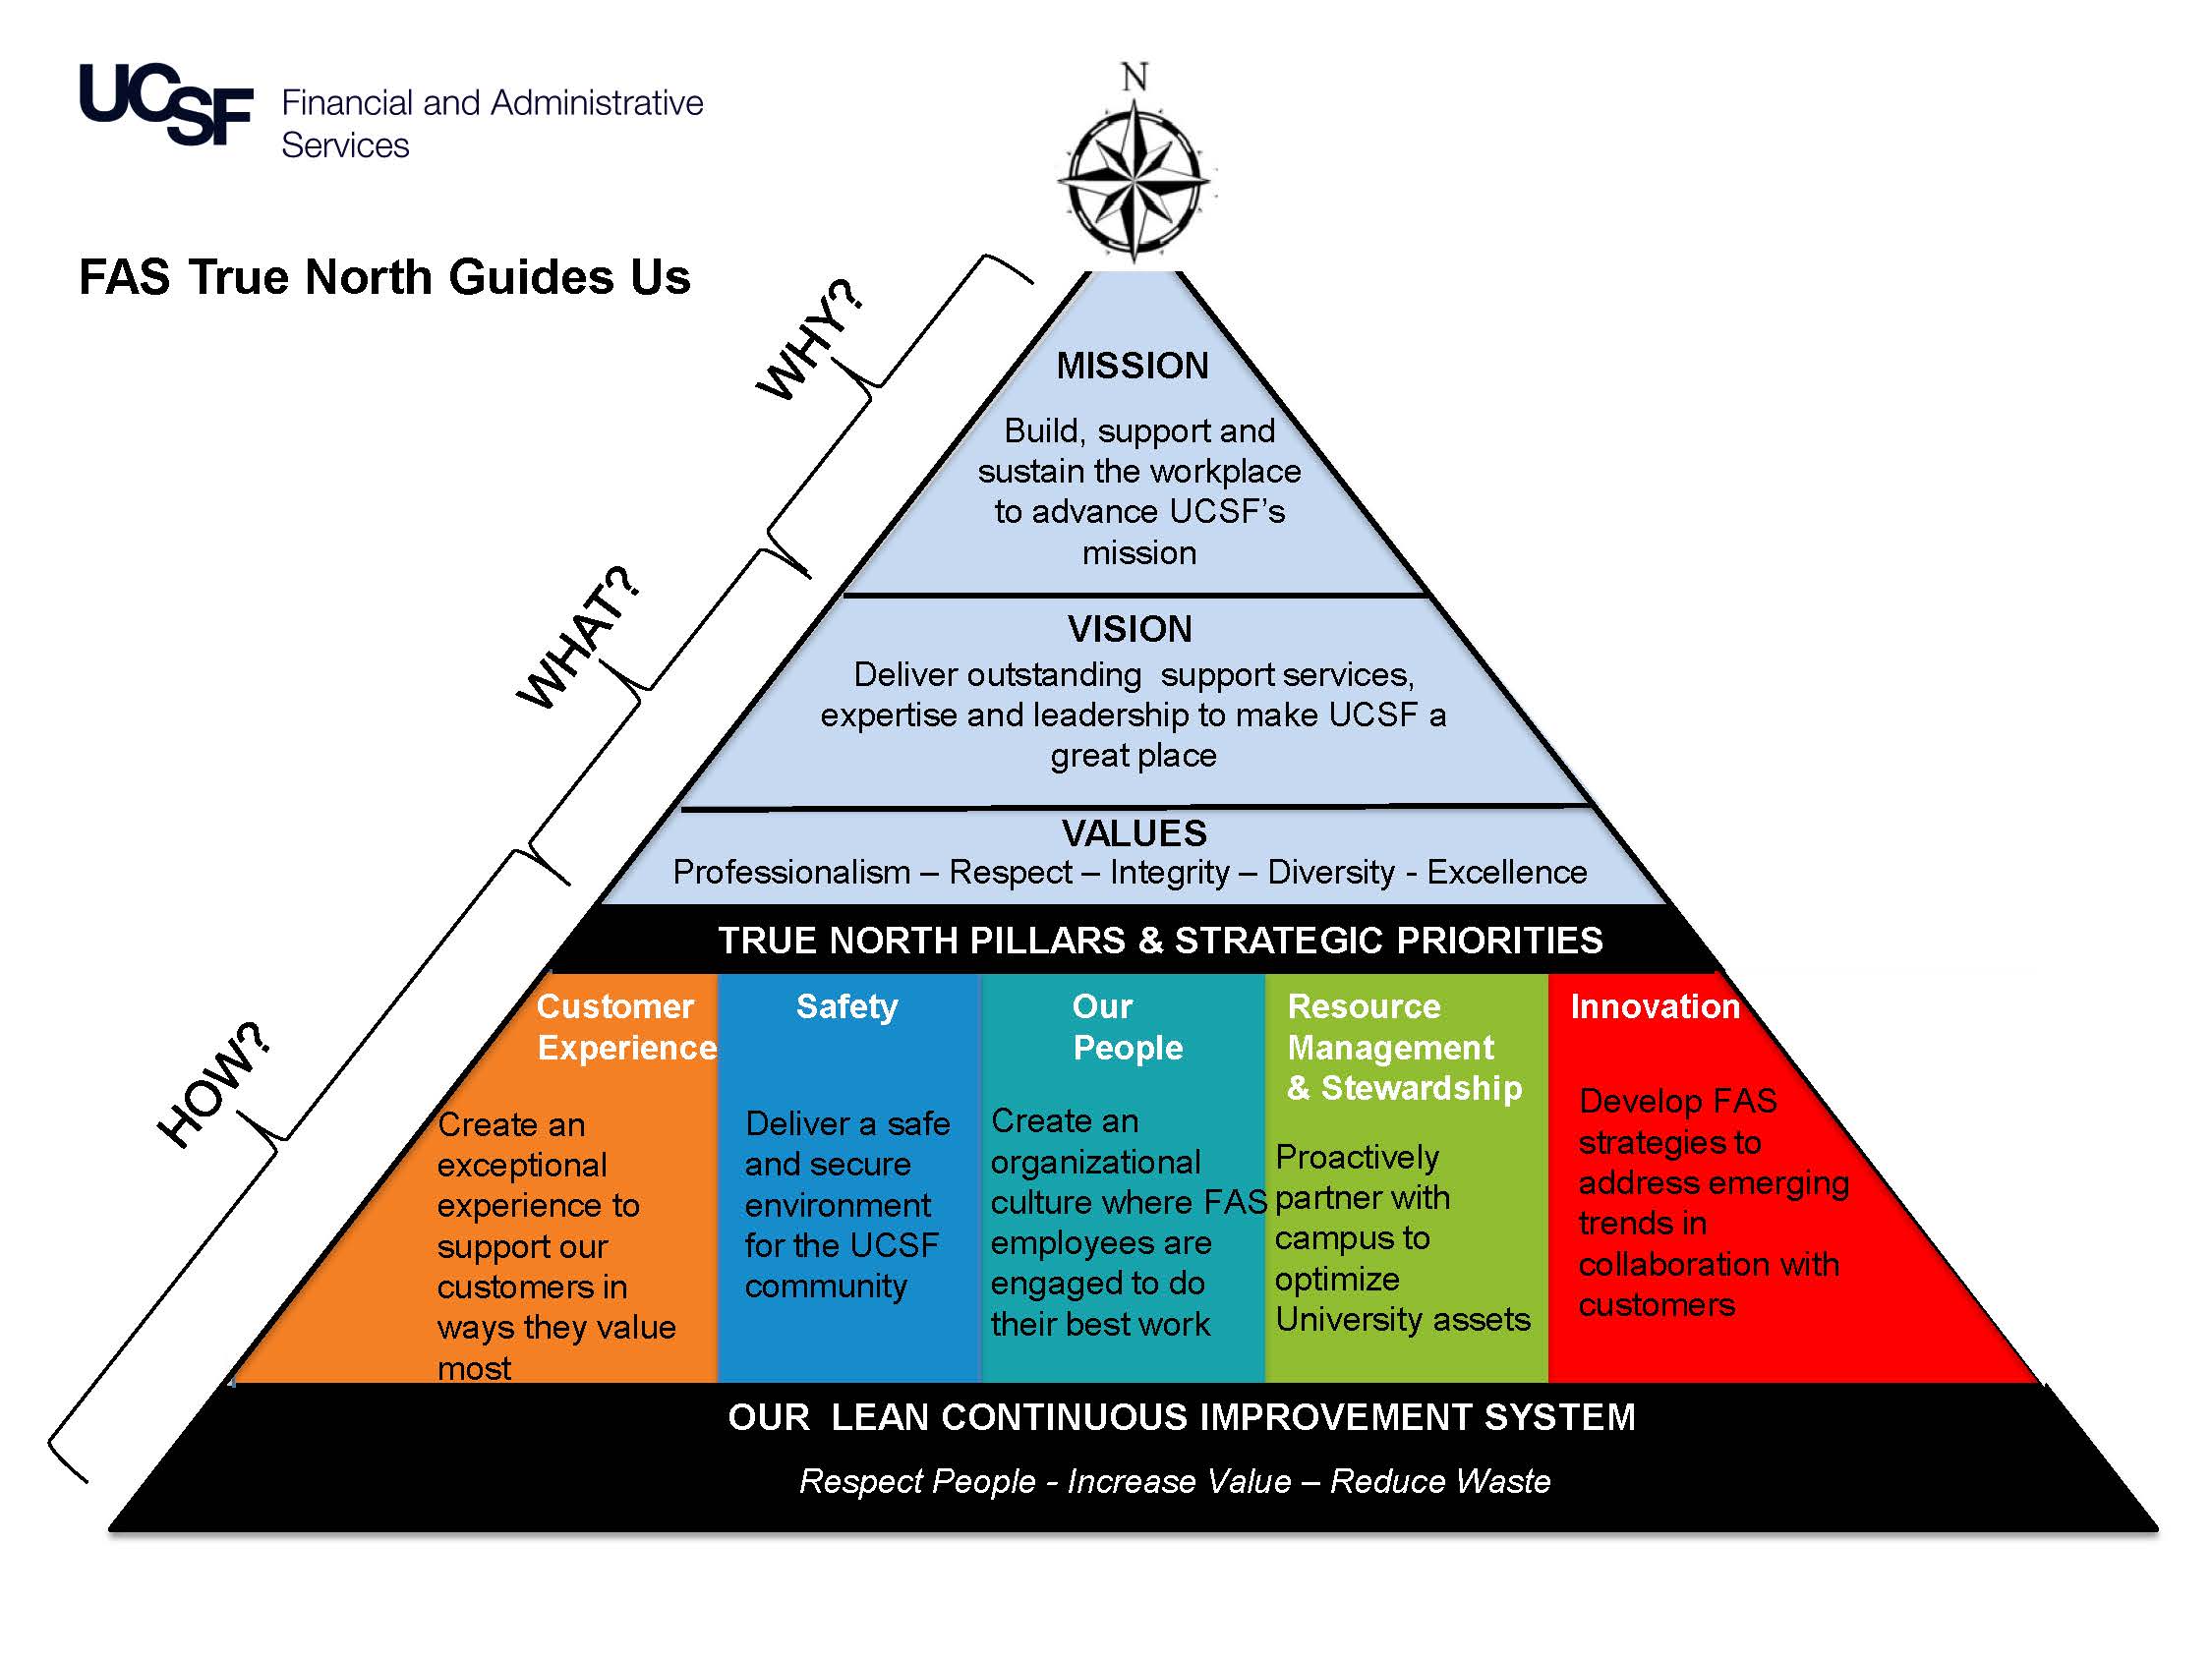 FAS True North Pyramid. The latest version can be found on the FAS True North page.